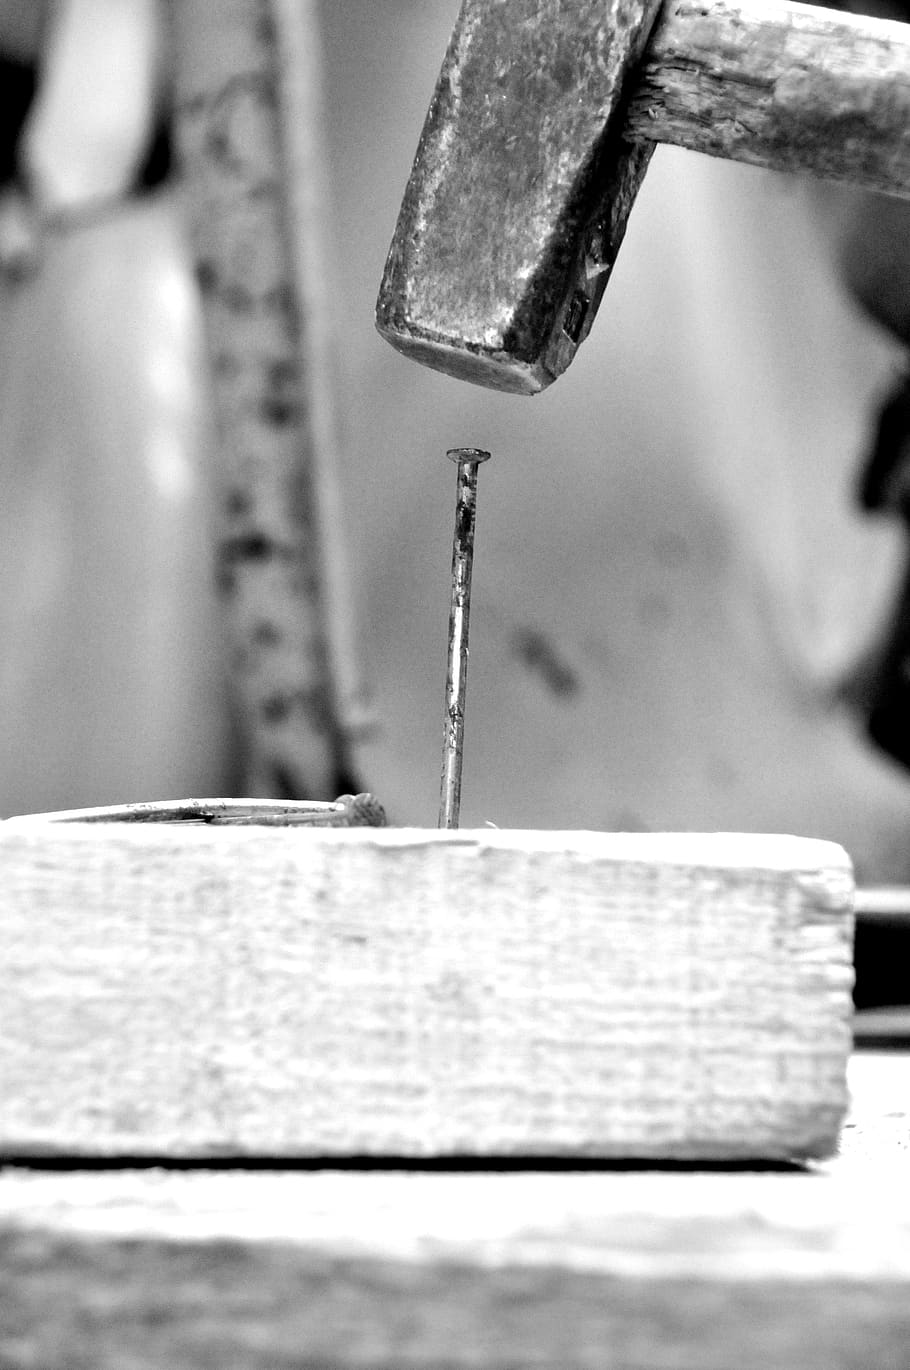 nail, hammer, craft, work, focus on foreground, metal, close-up, selective focus, equipment, machinery